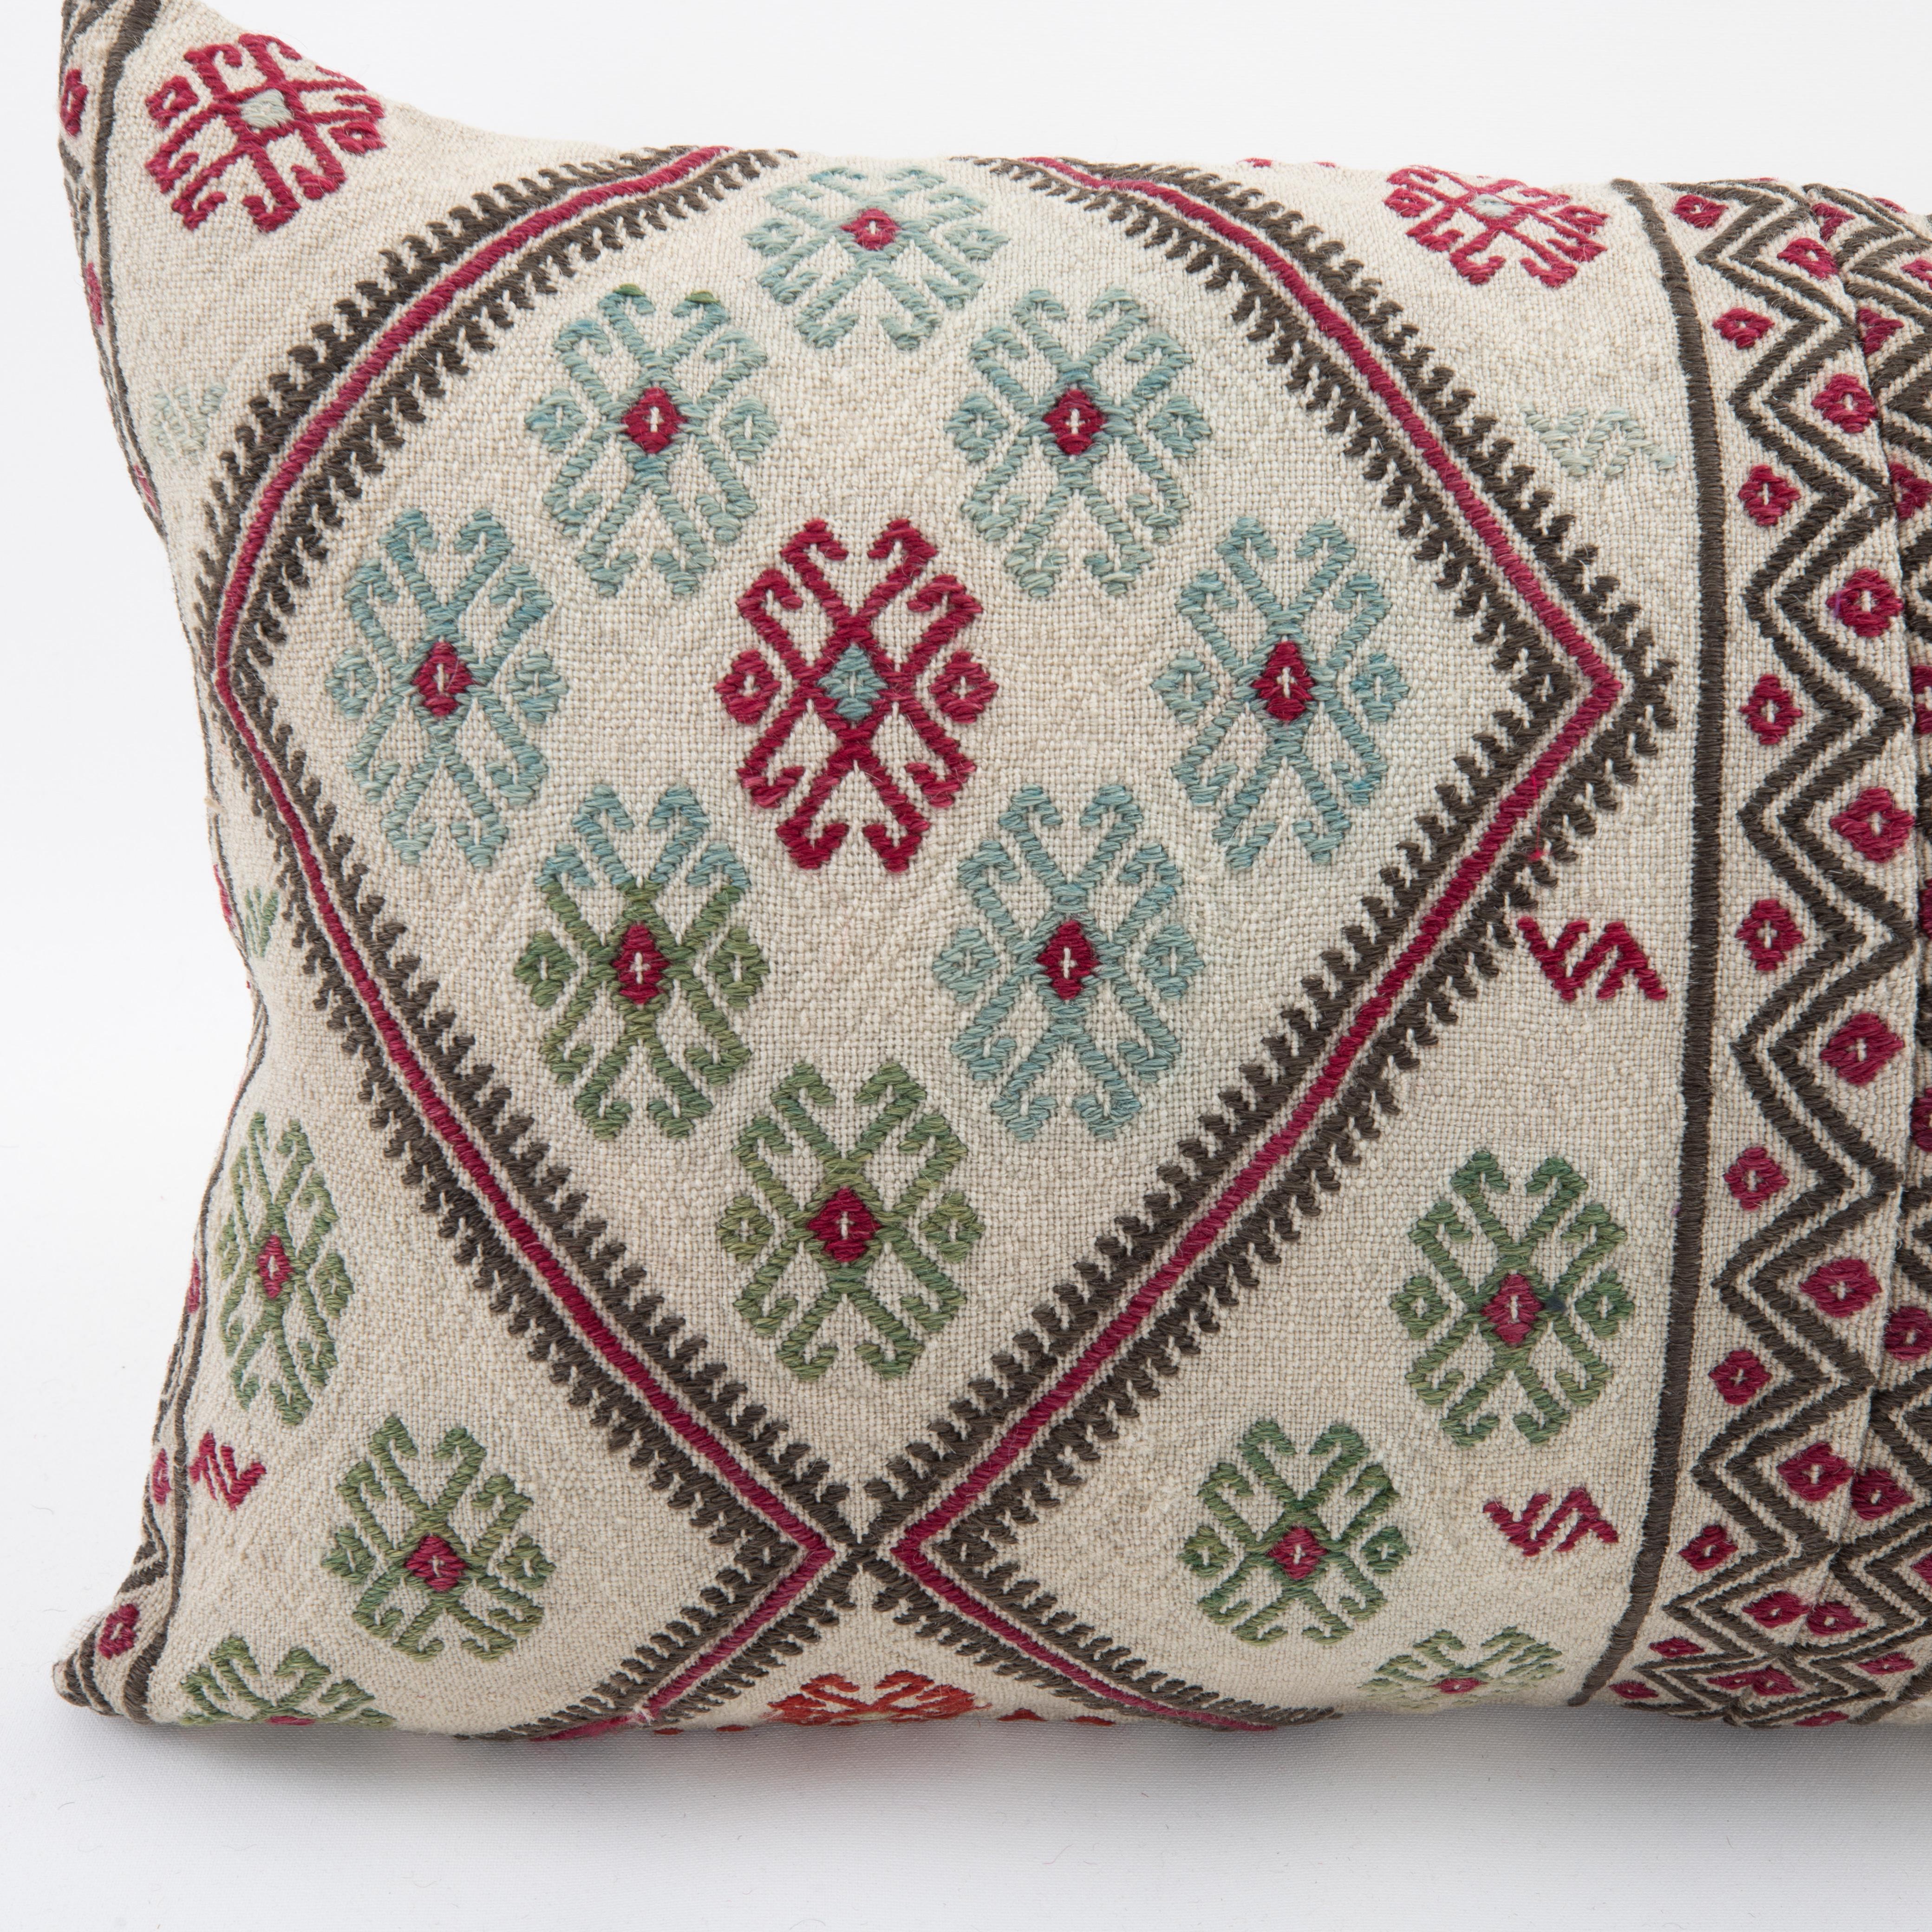 Kilim Pillow Case Made from an Antique Anatolian Cicim Rug